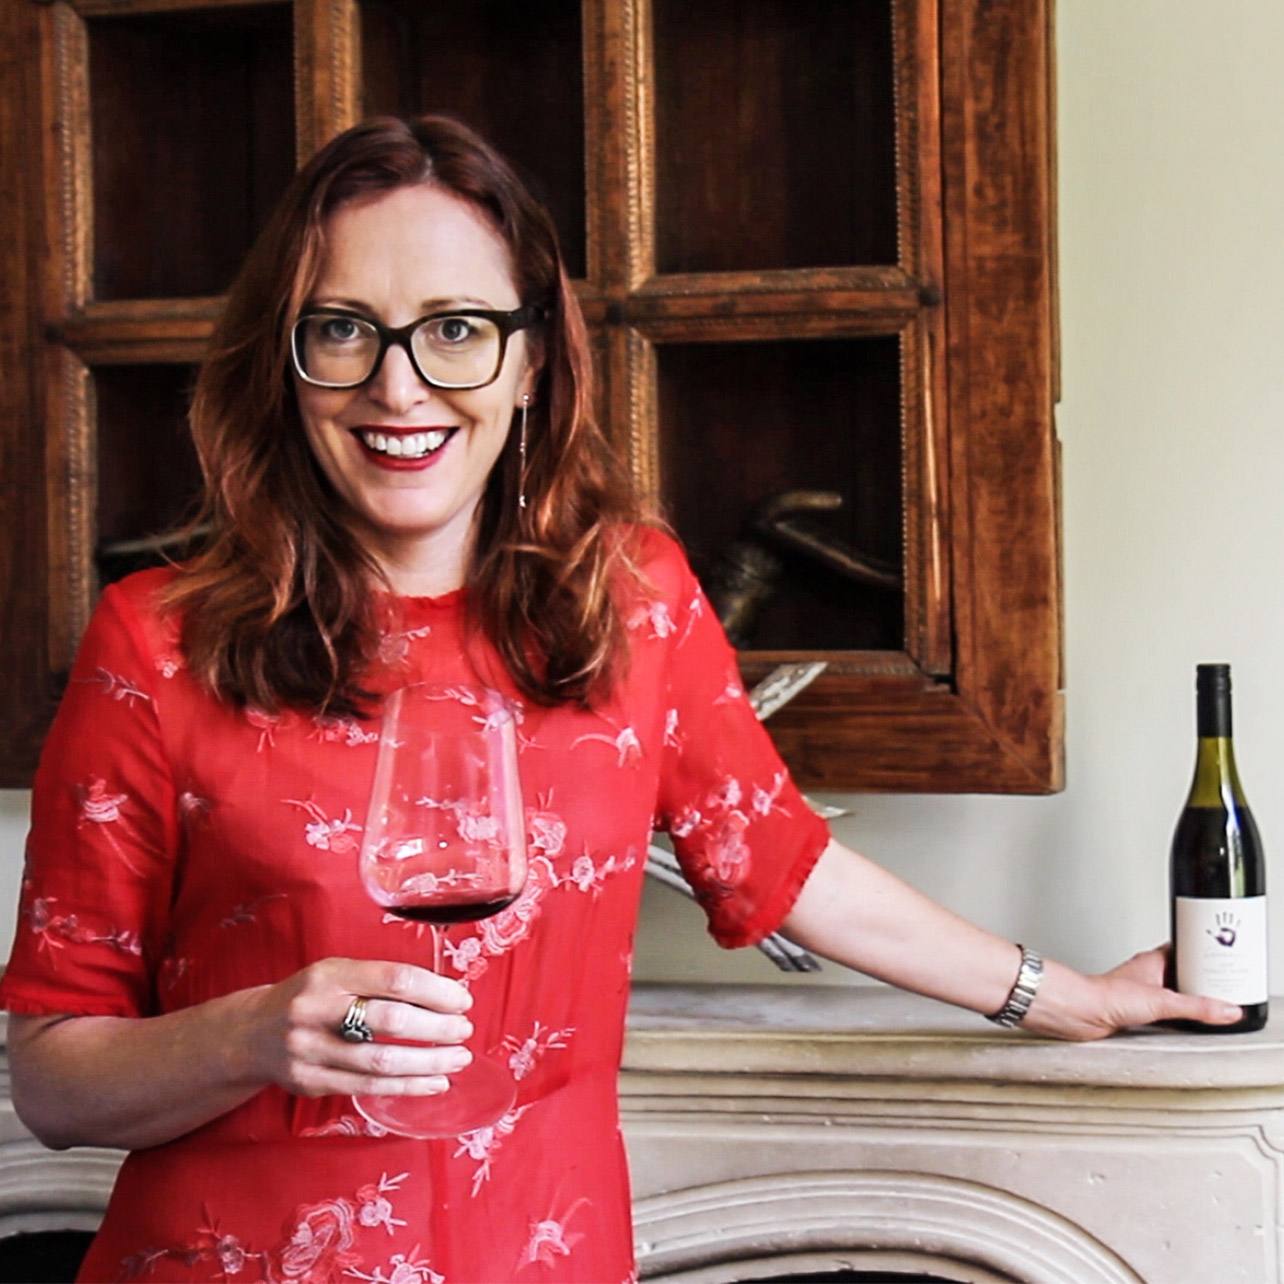 Tamra Kelly-Washington photographed with a glass of Seresin wine and bottle